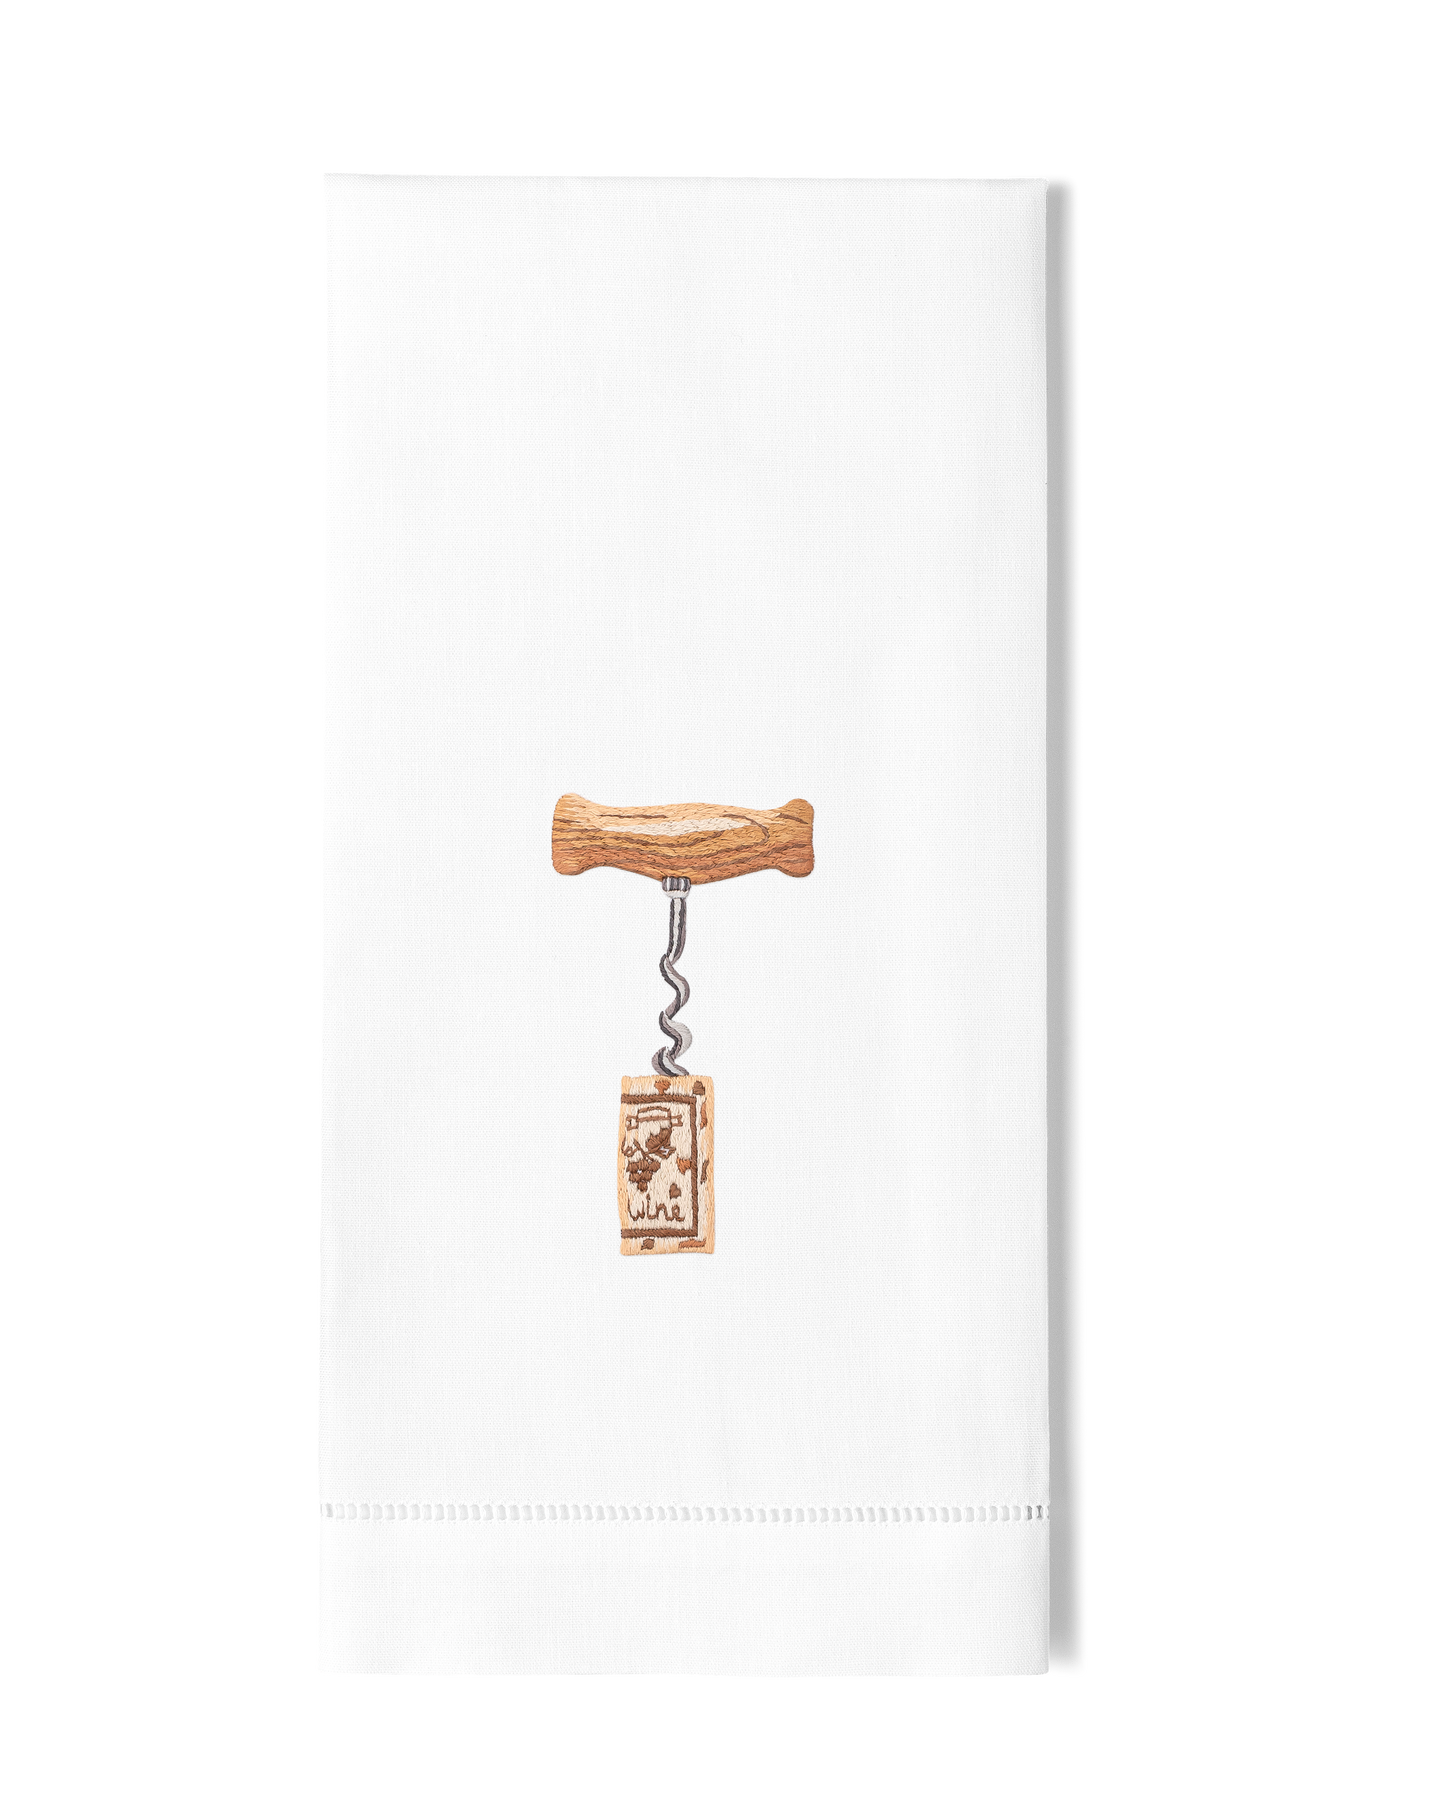 A white hand towel with a hemstitch. A wooden corkscrew twisted into a cork is embroidered in the center.